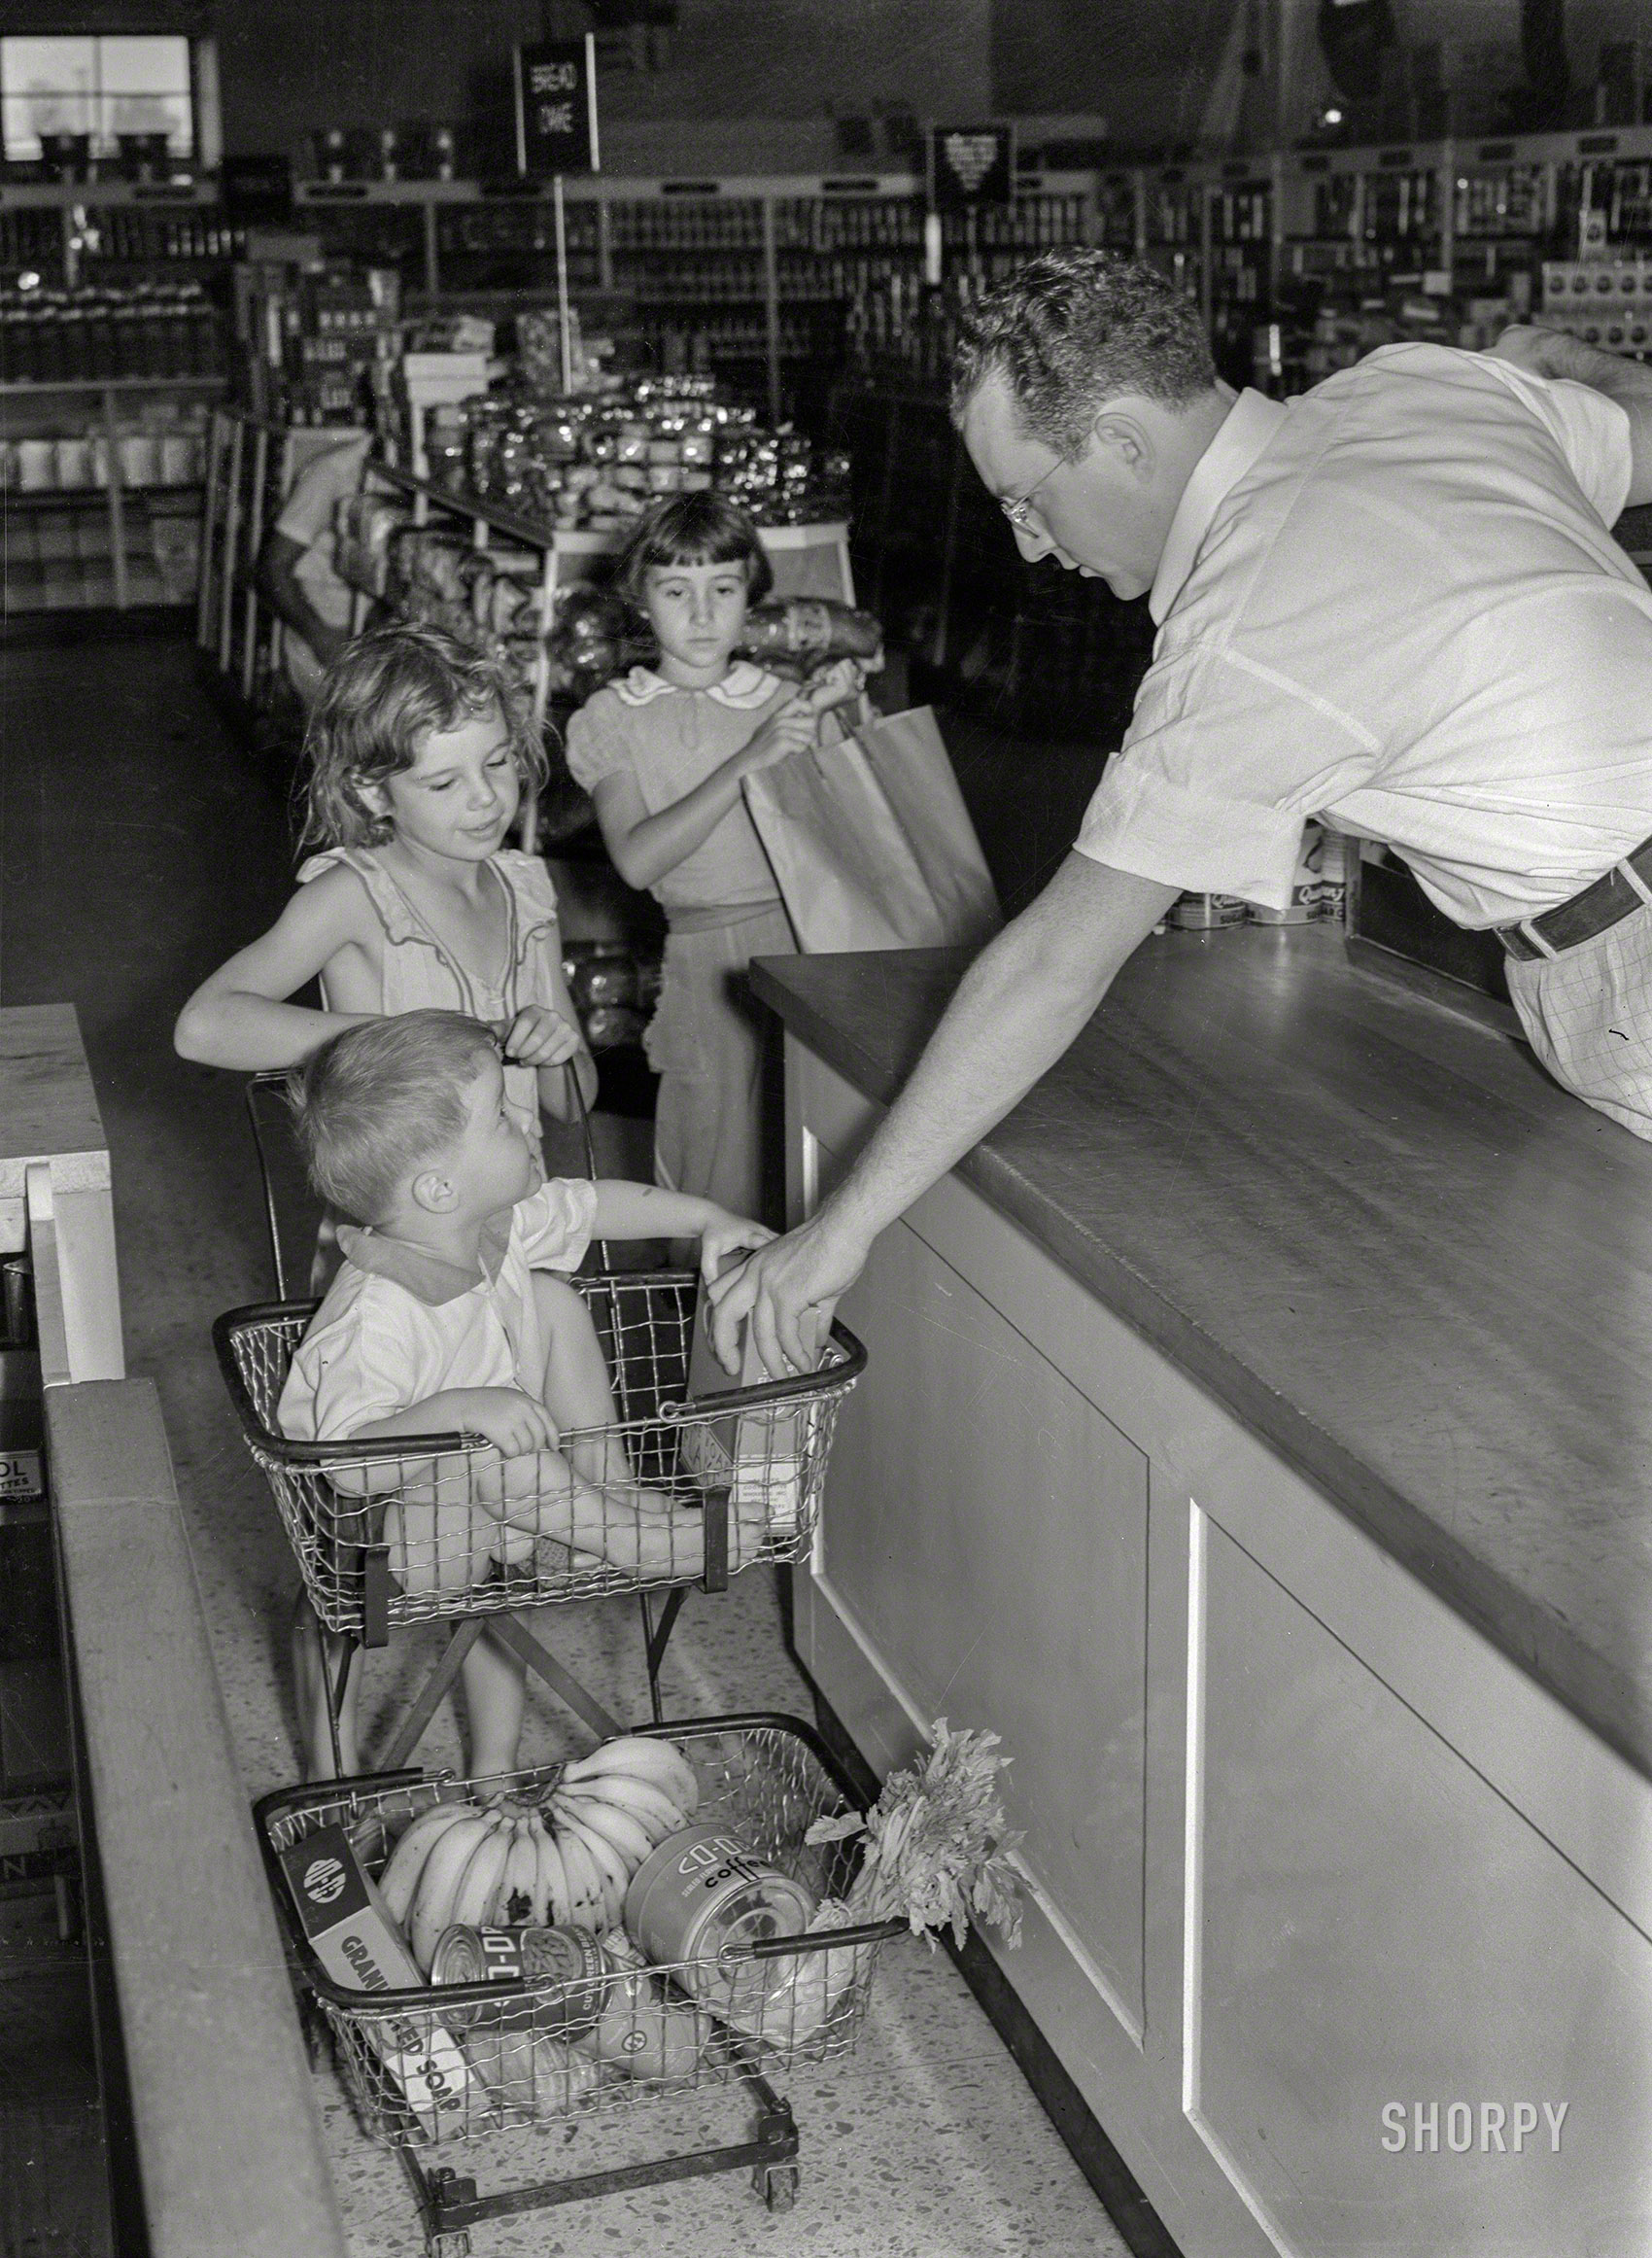 September 1938. "Children of Greenbelt, Maryland, family buying groceries in cooperative store." Acetate negative by Marion Post Wolcott. View full size.